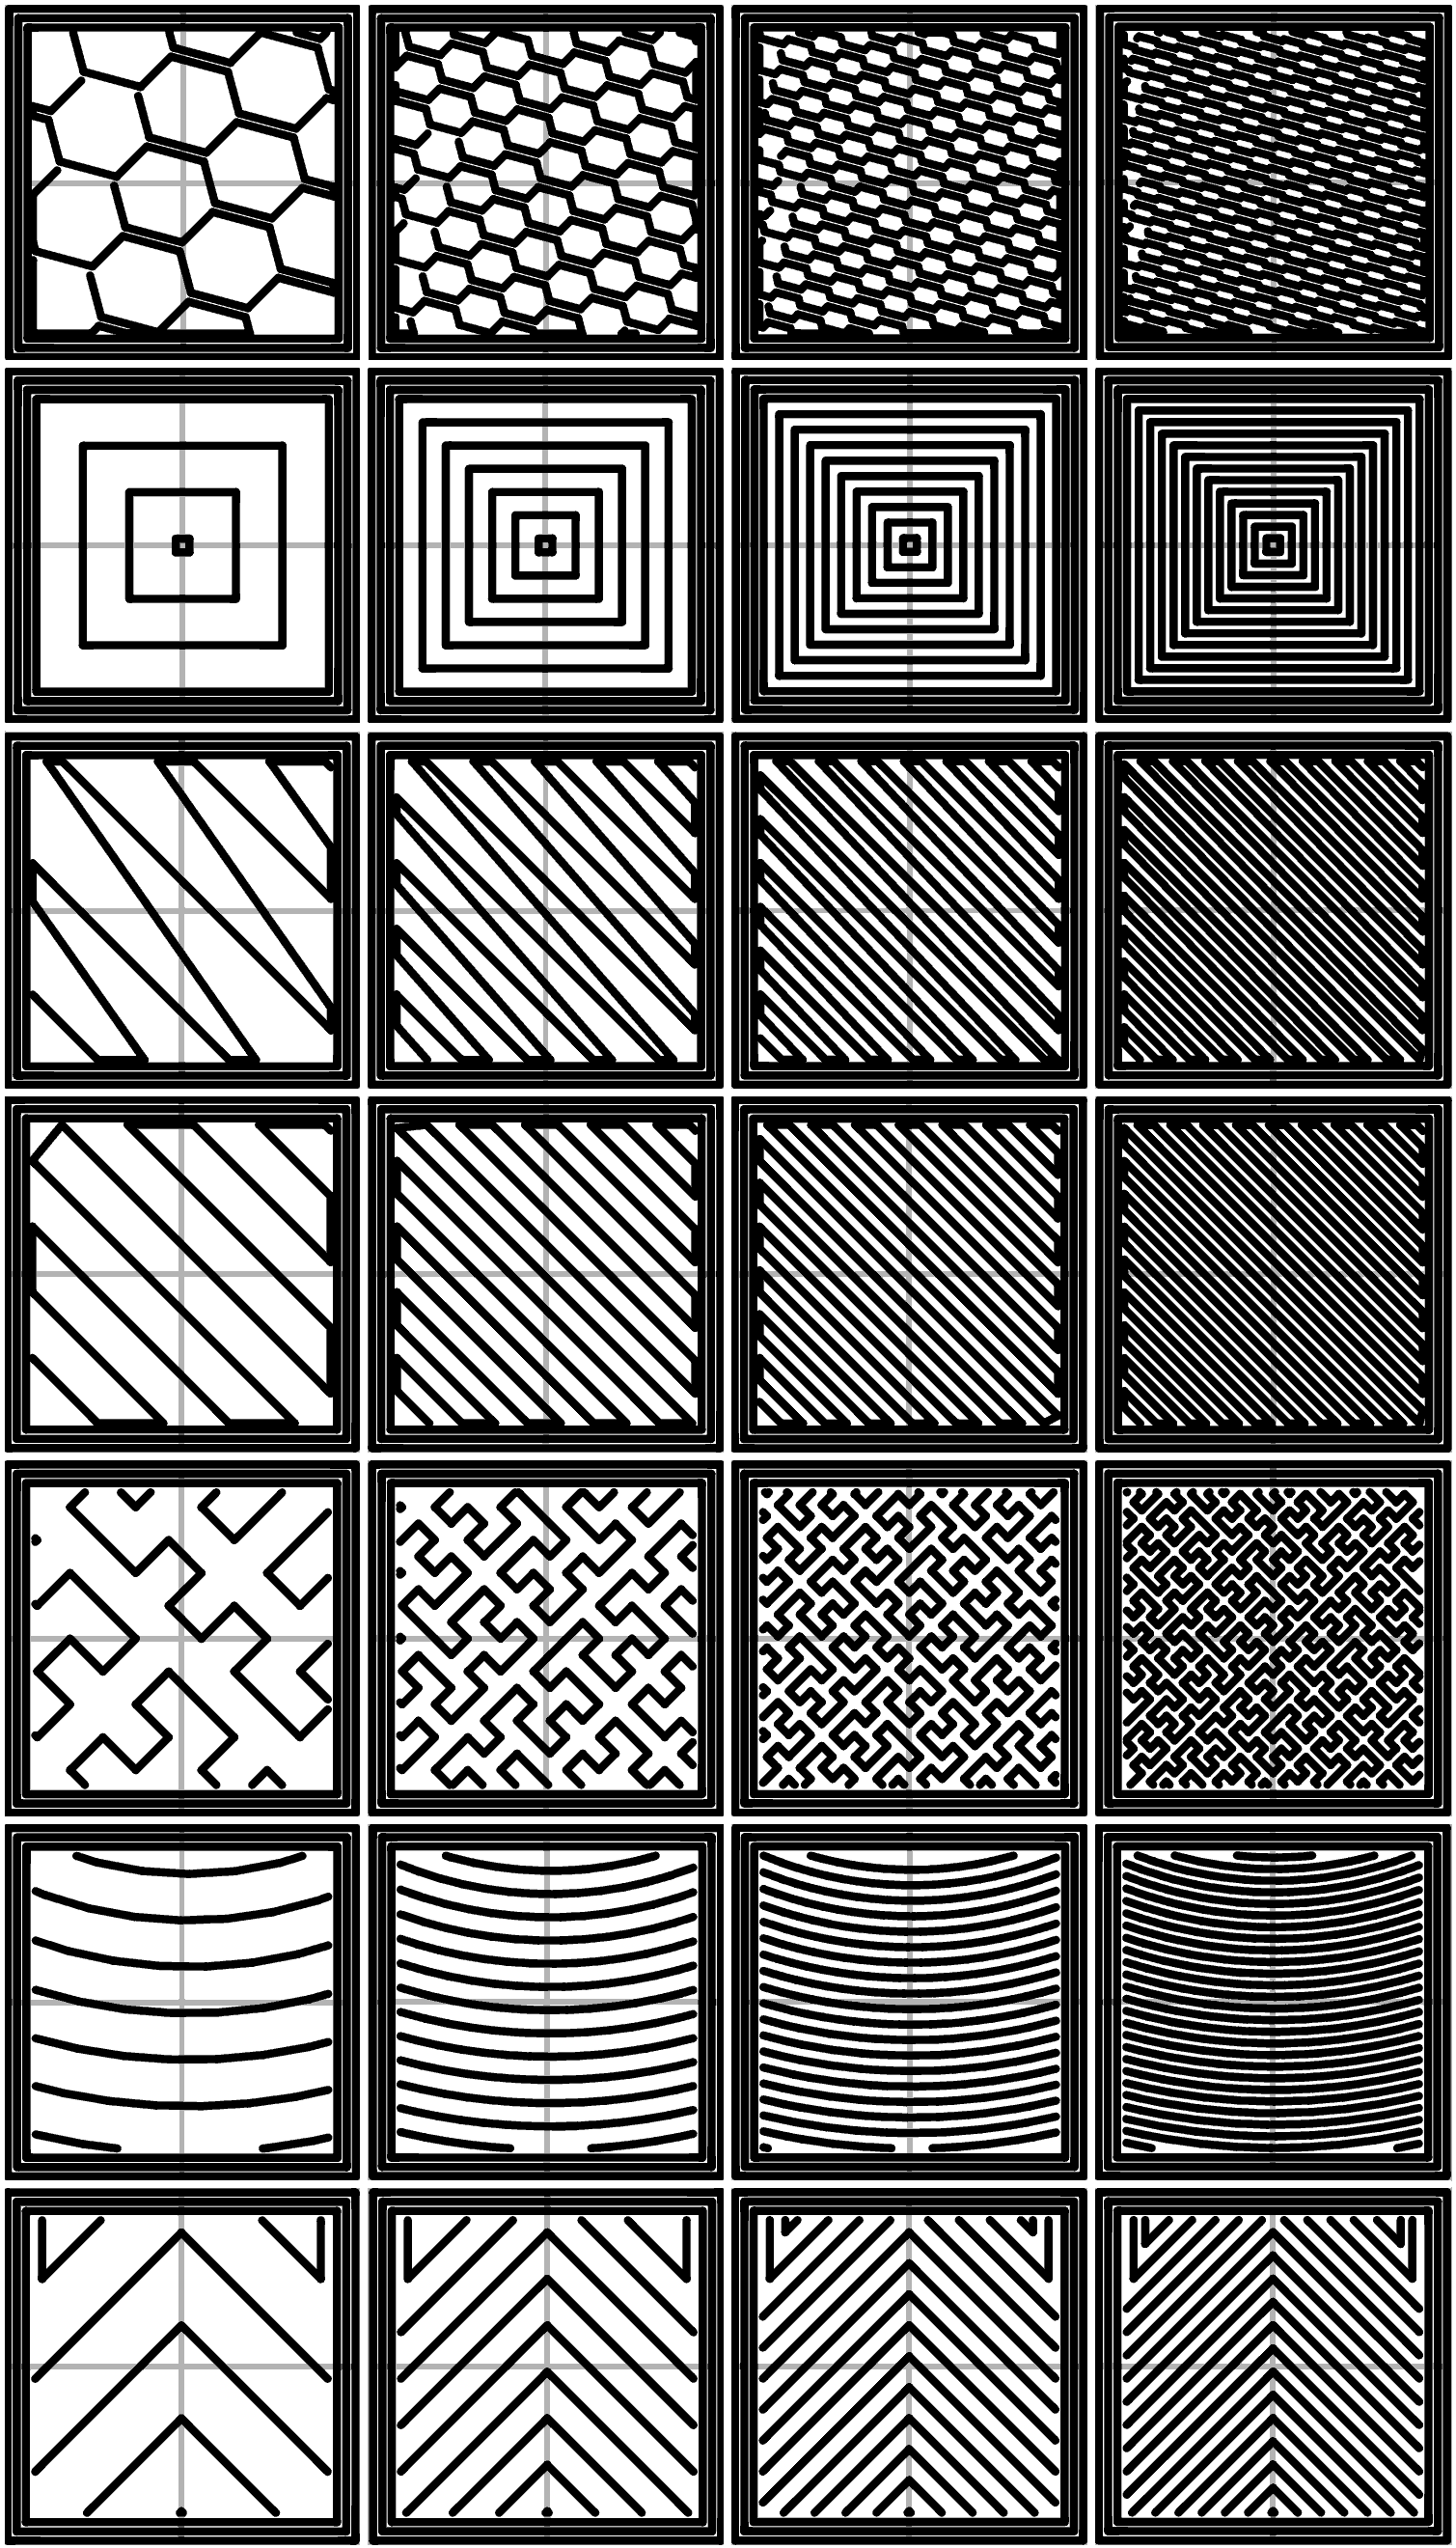 Infill patterns at varying densities. Left to Right: 20%,40%,60%,80%. Top to Bottom: Honeycomb, Concentric, Line, Rectilinear, Hilbert Curve, Archimedean Chords, Octagram Spiral